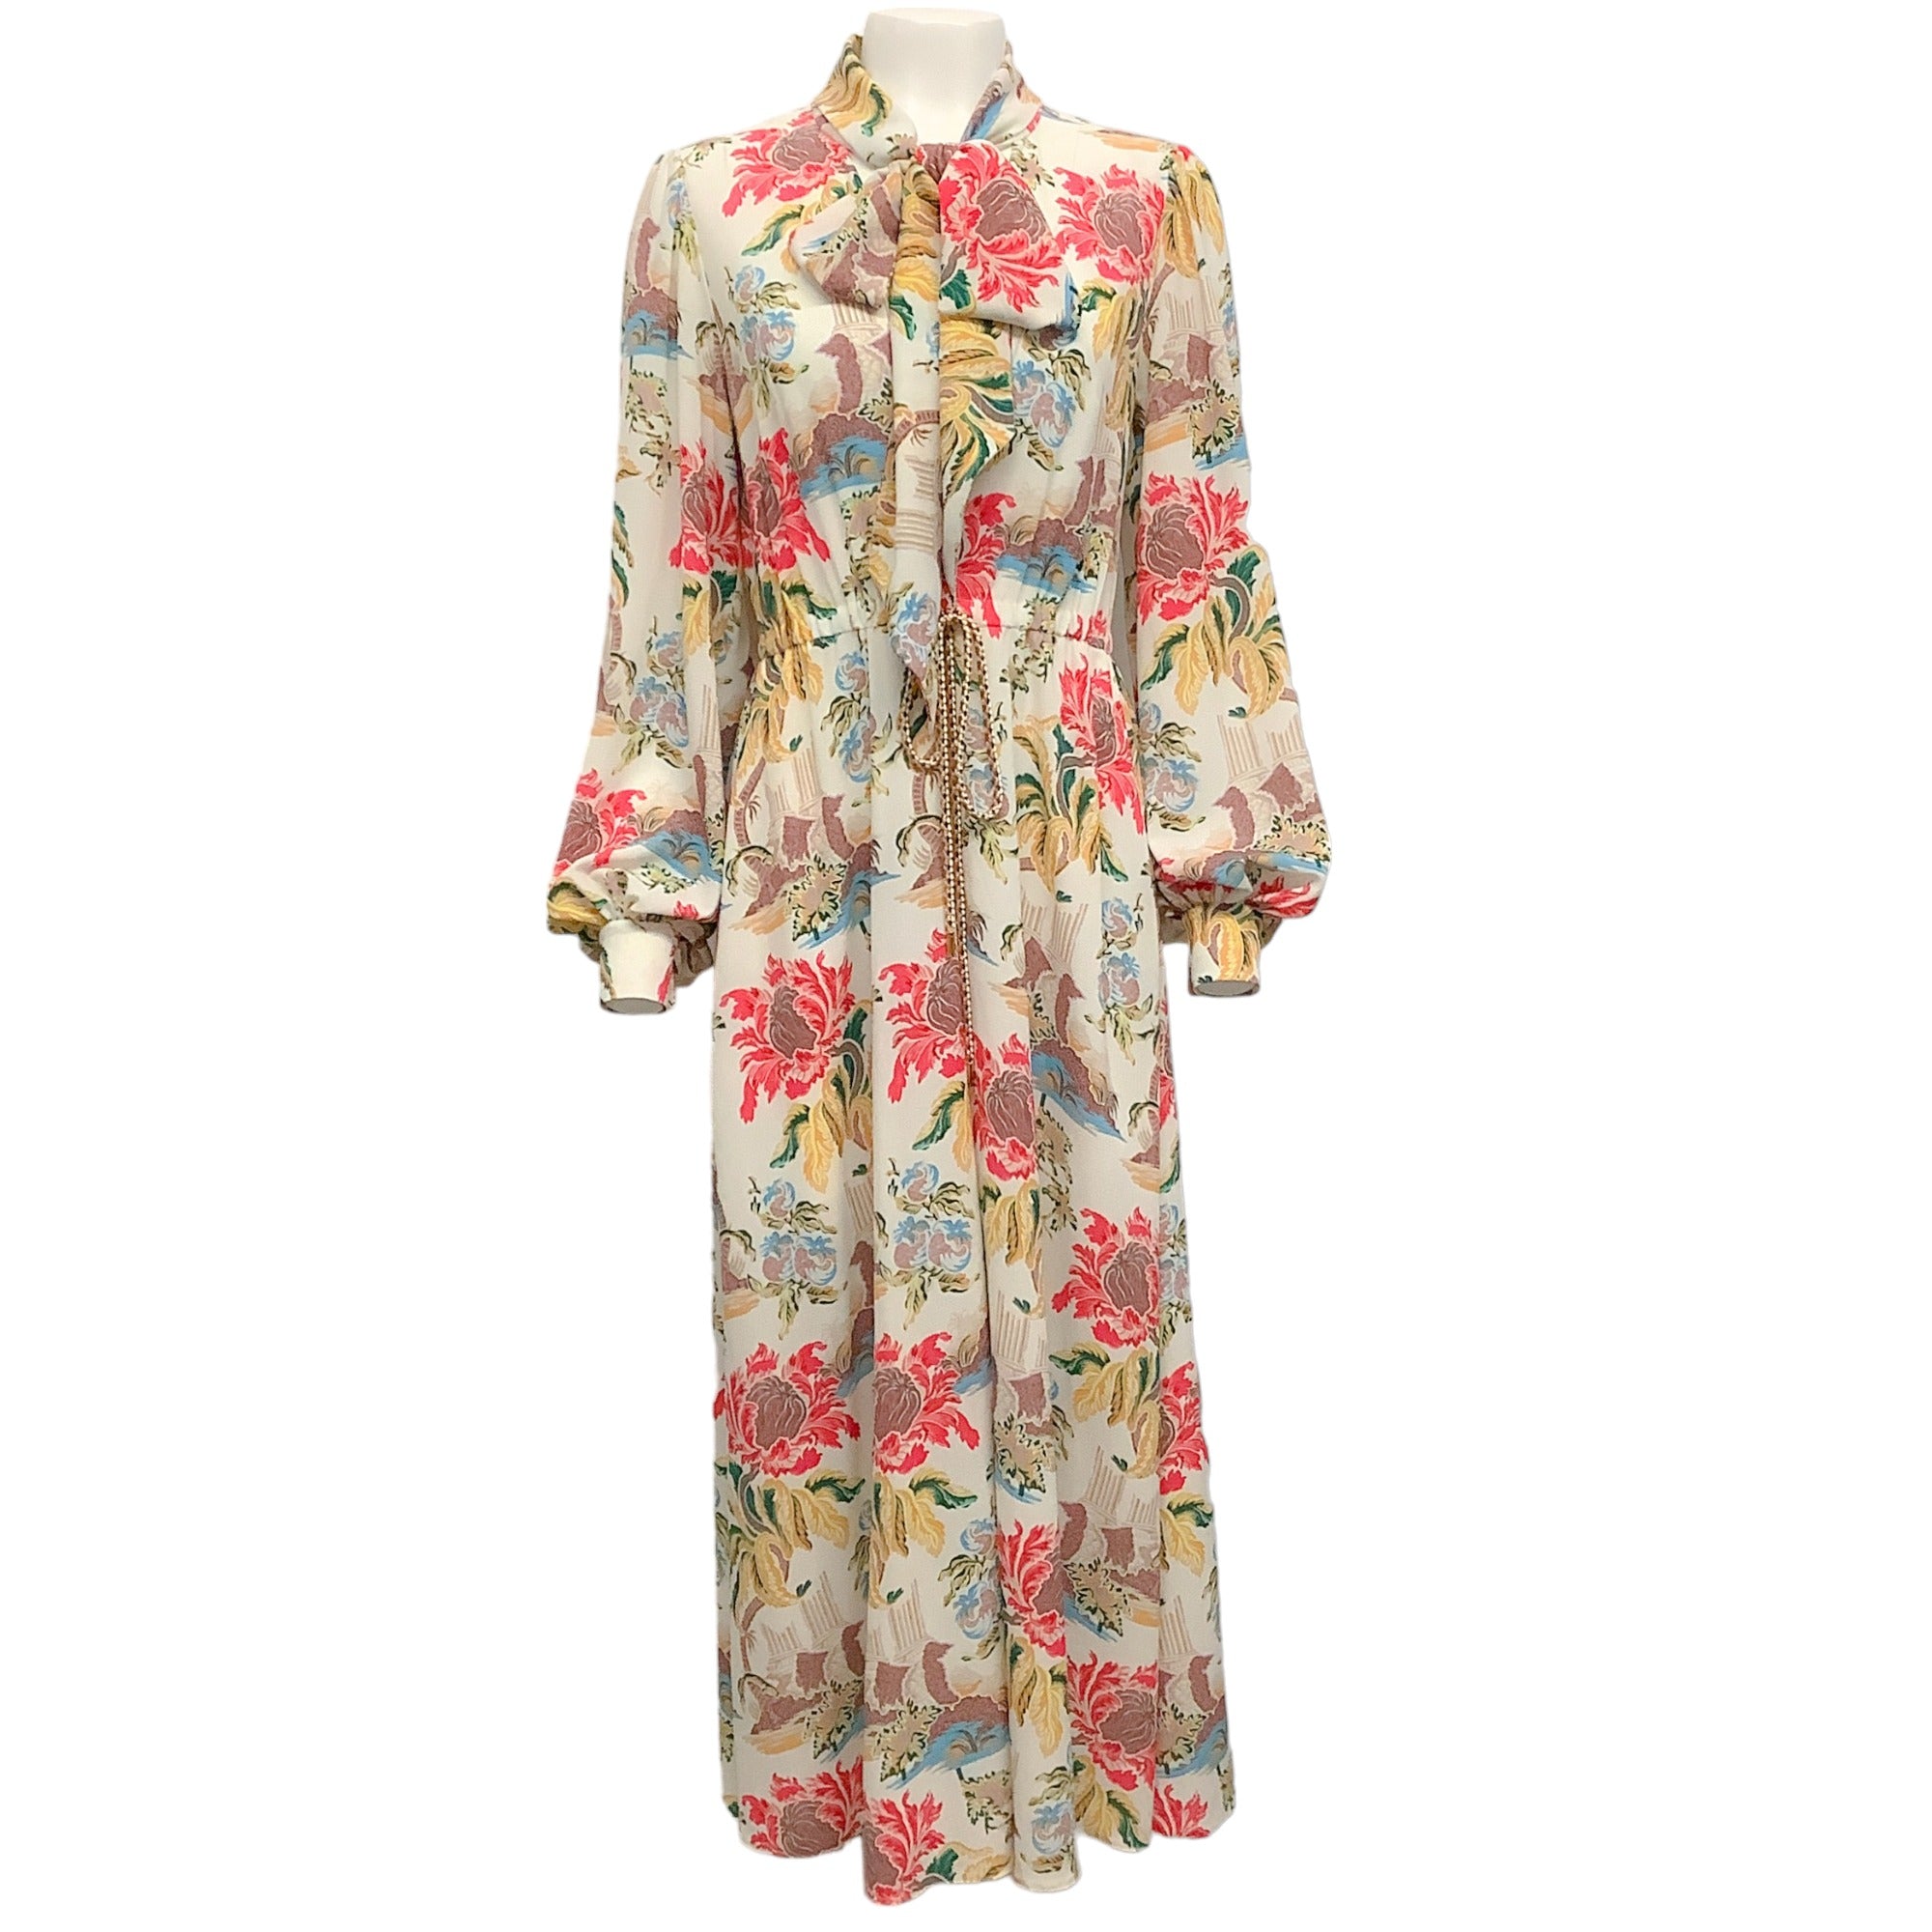 Peter Pilotto Ivory Floral Print Dress with Neck Tie